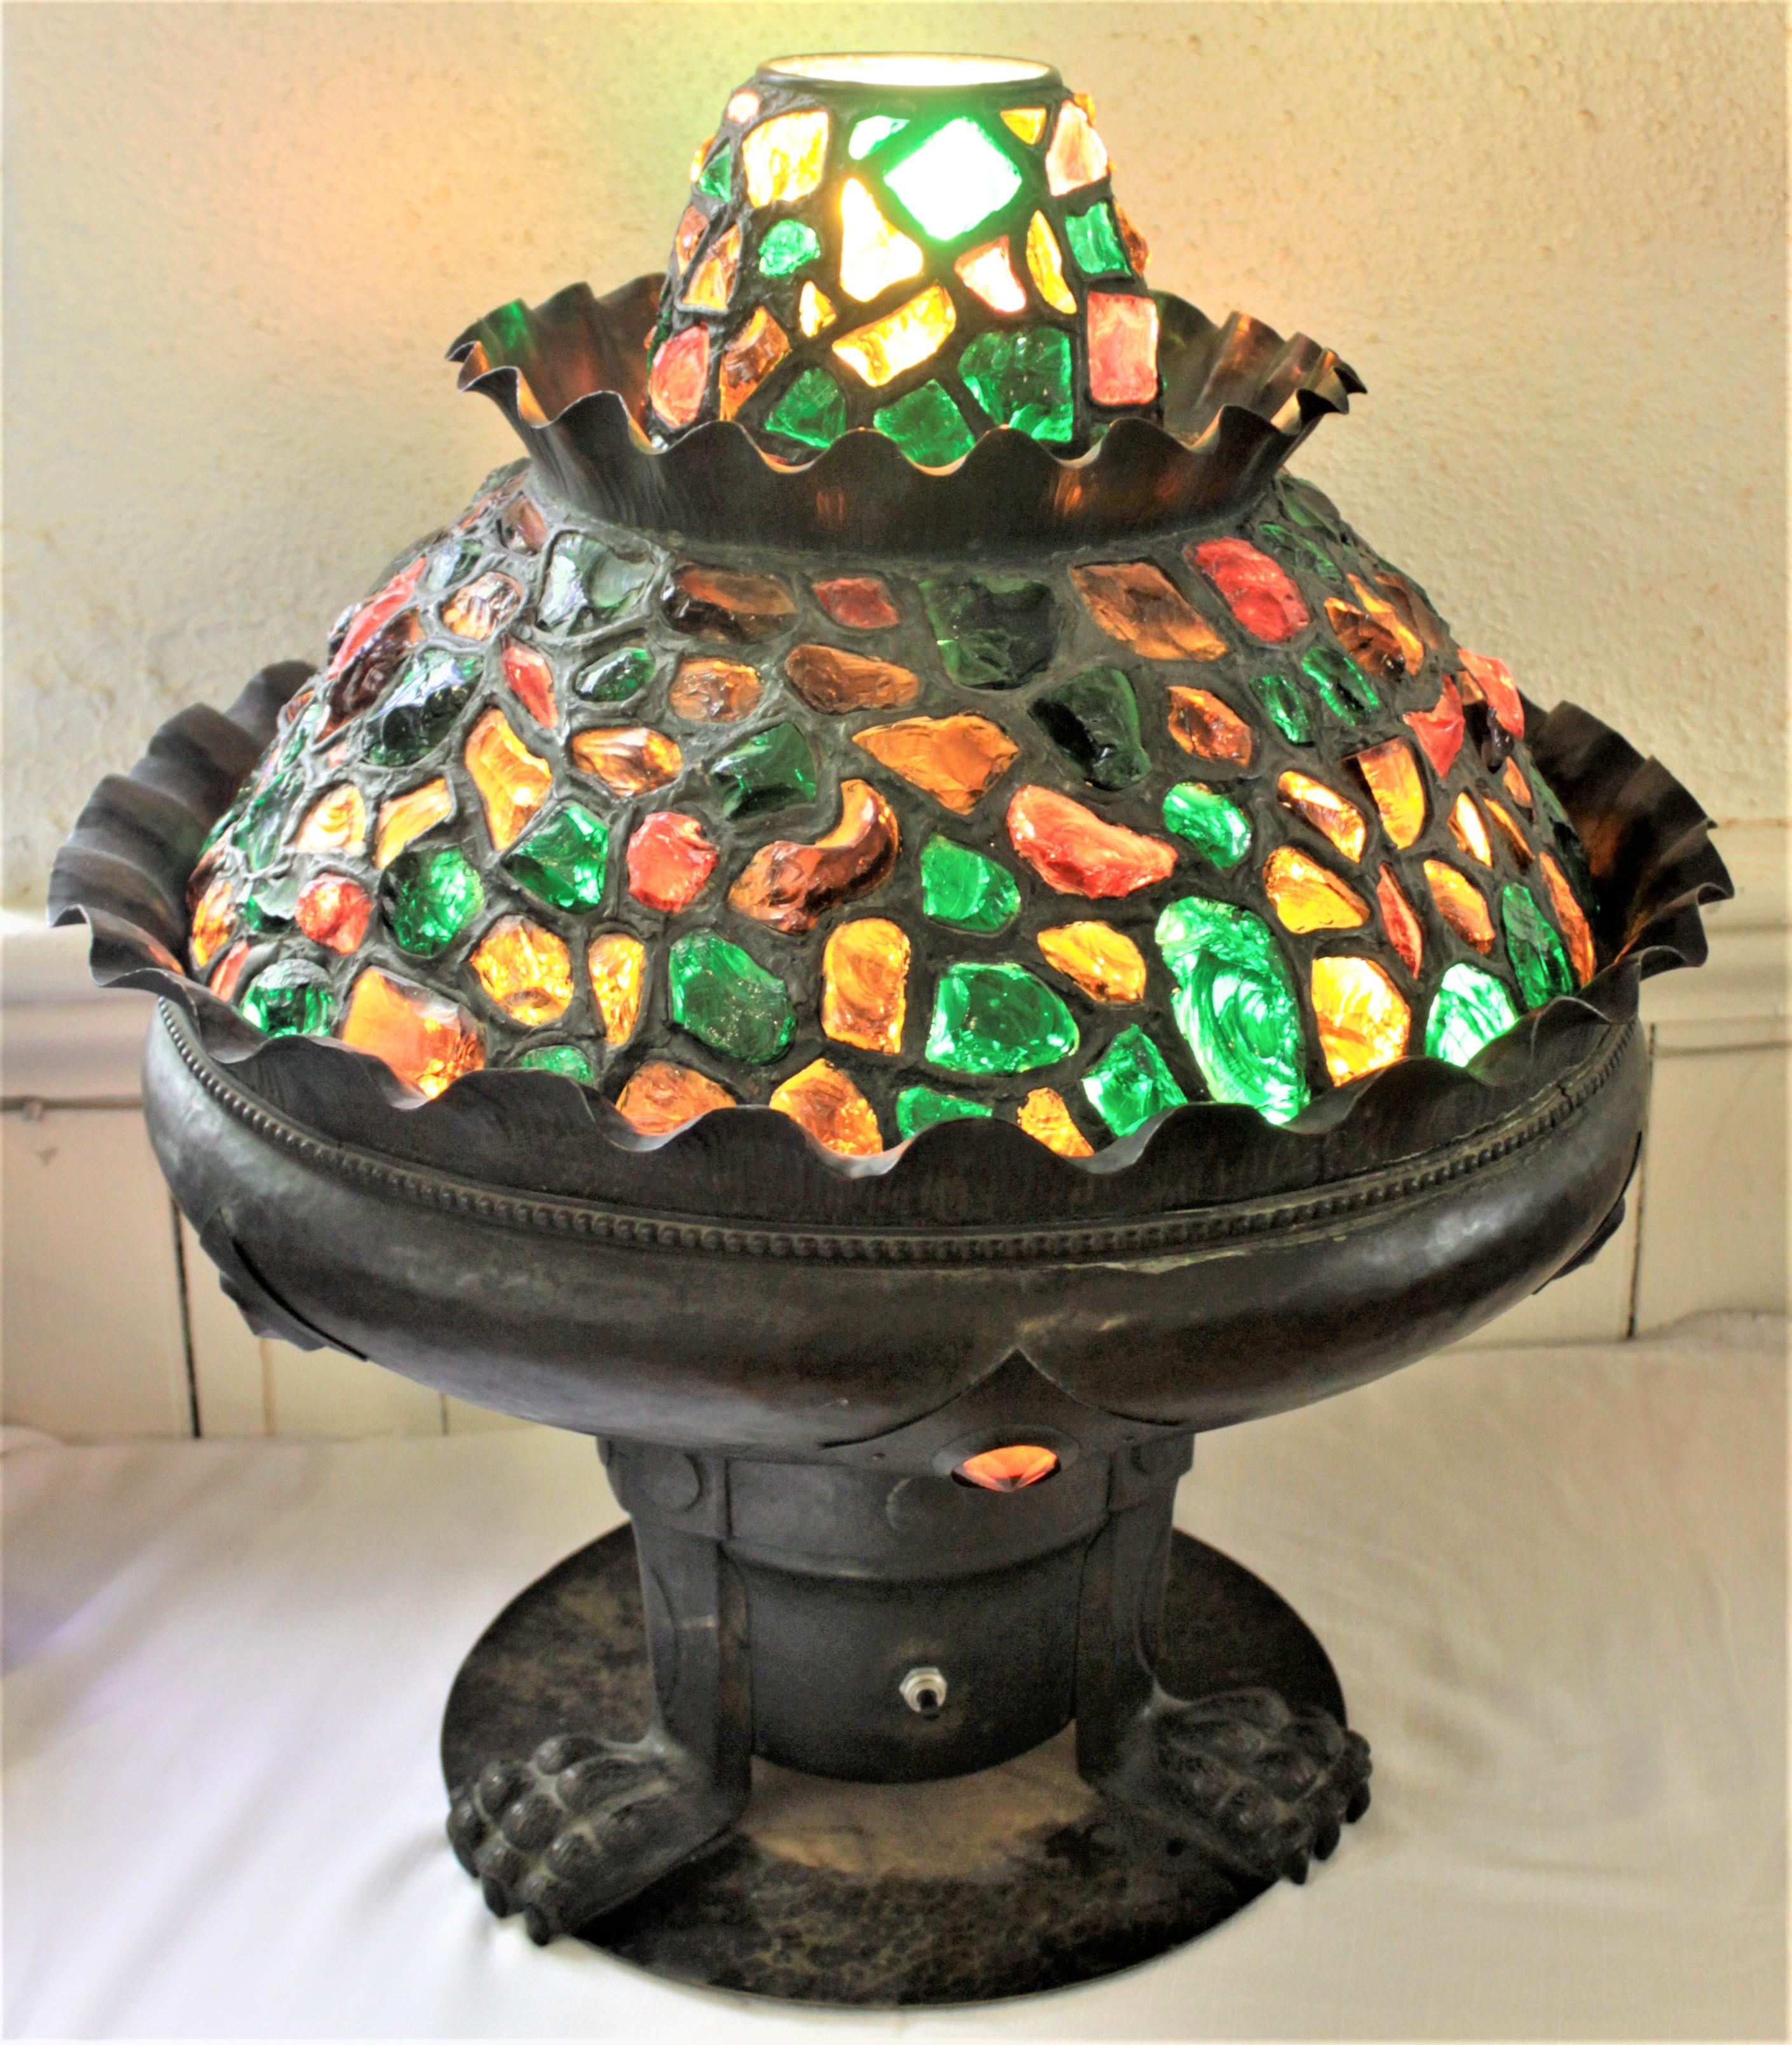 This large and substantial Arts & Crafts double domed light was once an indoor fountain and was presumed to have been made in the United States in circa 1900. The fountain component of the fountain is no longer functional as the pump has long since